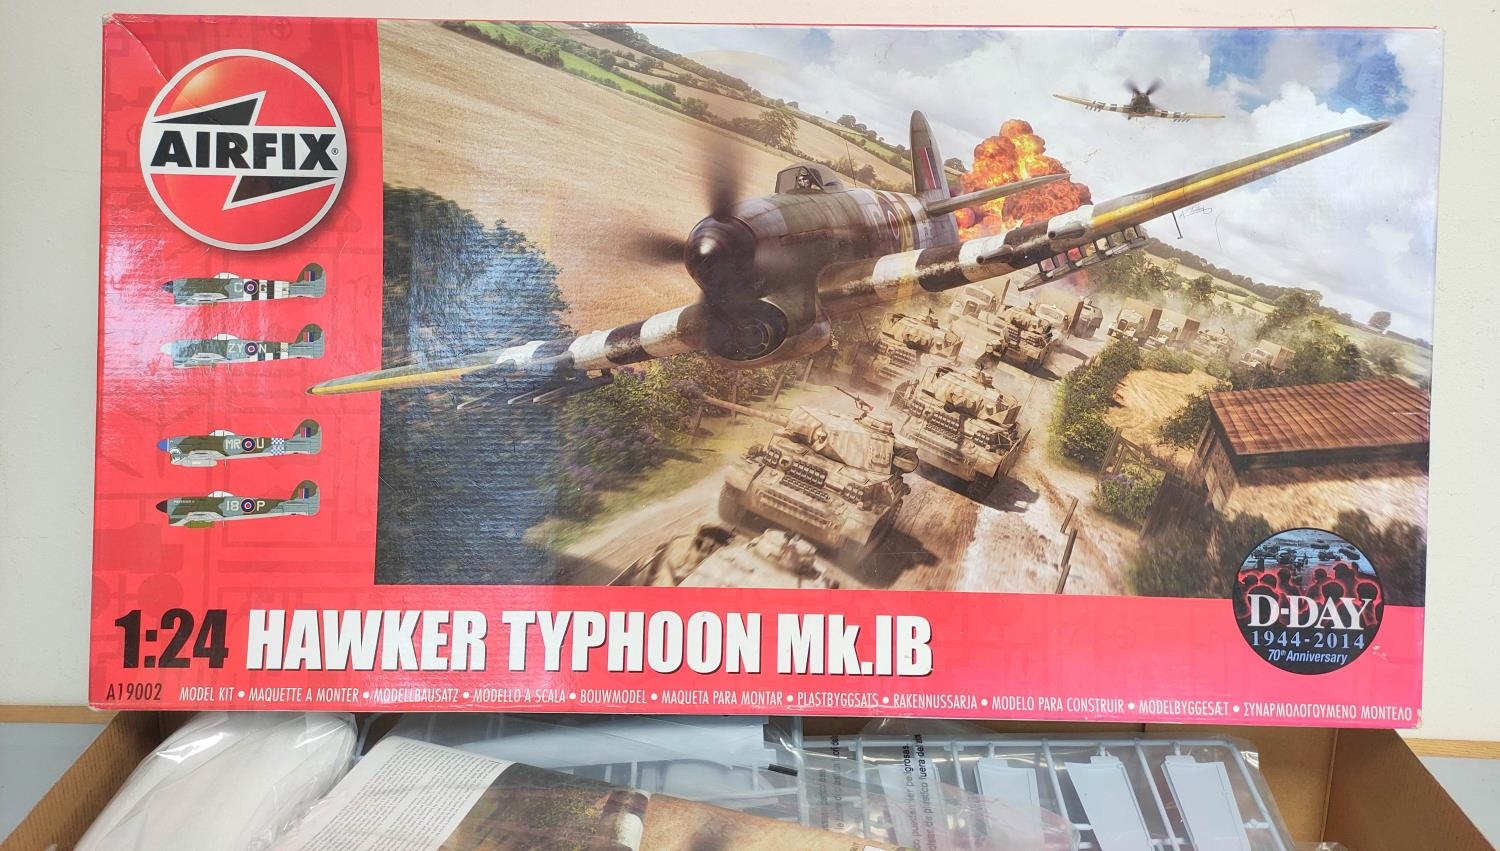 Airfix. Boxed 1:24 scale Hawker Typhoon Mk IB D-Day Anniversary 1944-2014 model. Kit no. A19002. - Image 2 of 7